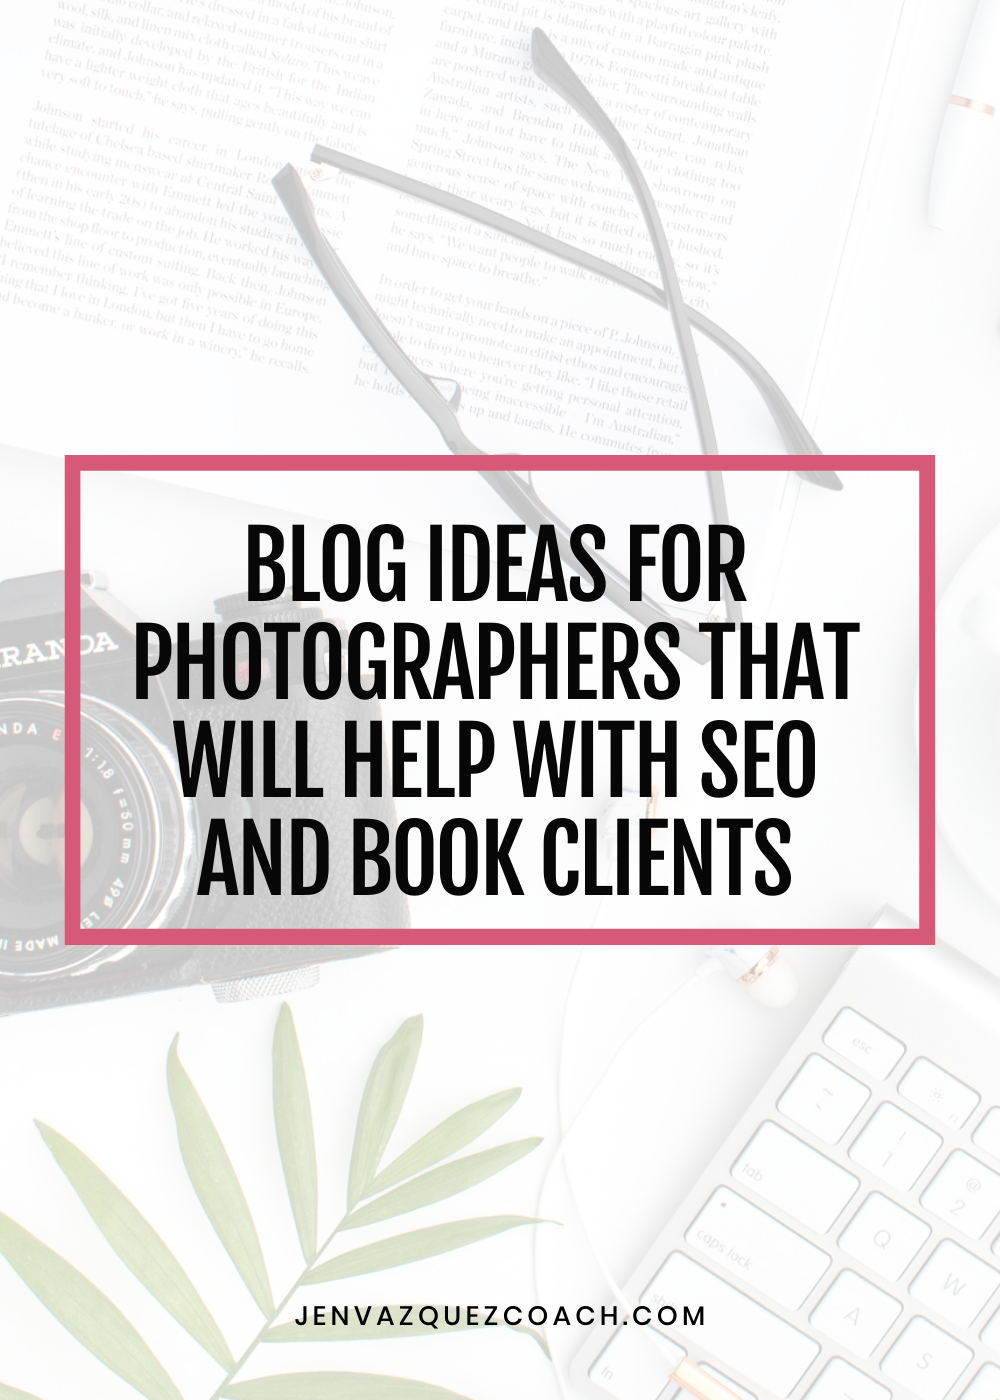 Blog Ideas for Photographers that will help with SEO and book clients